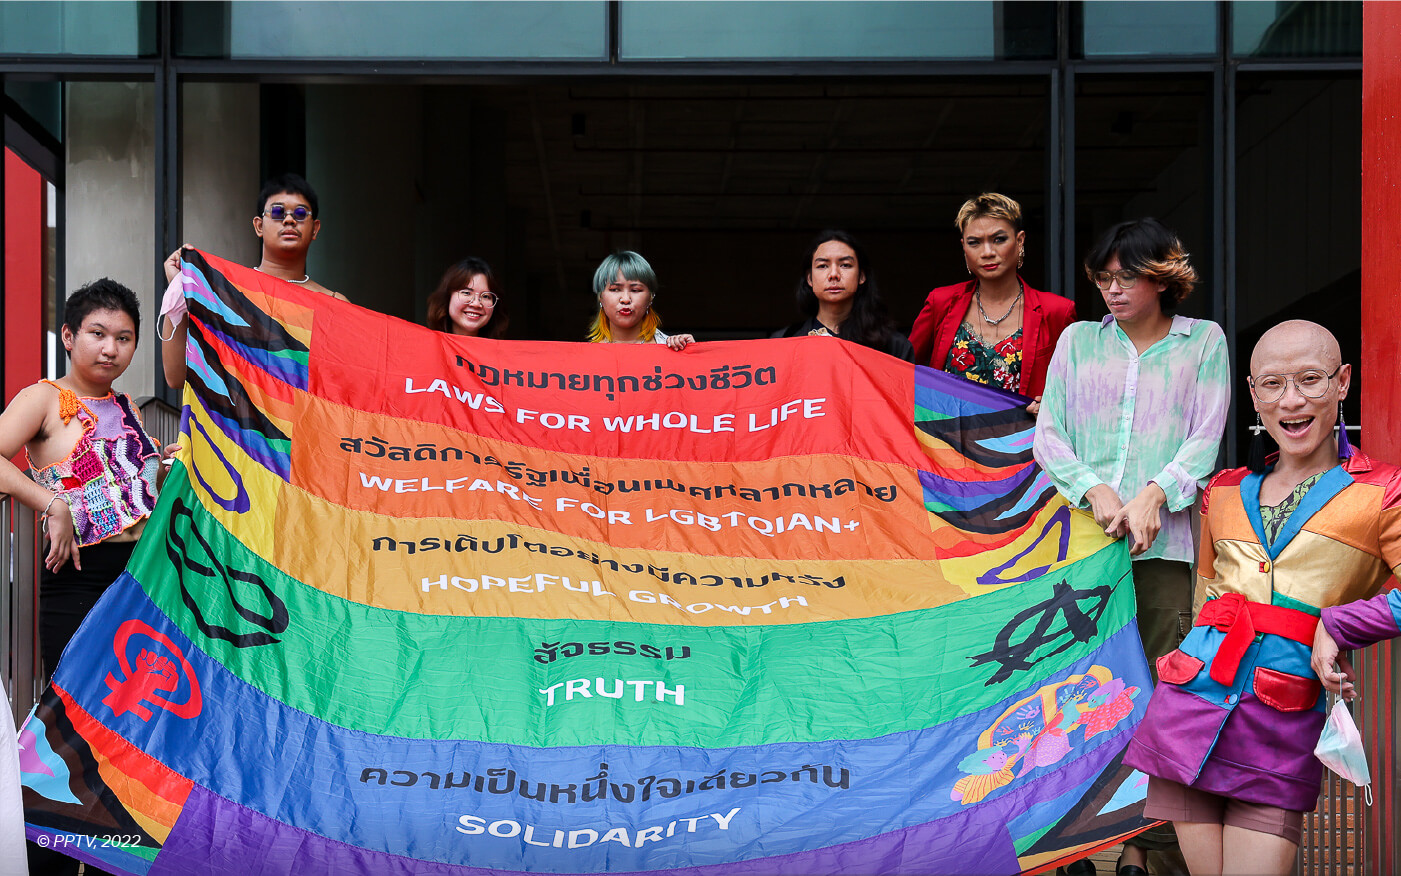 Thailand: Pass Marriage Equality Bill, Protect LGBTI+ Rights